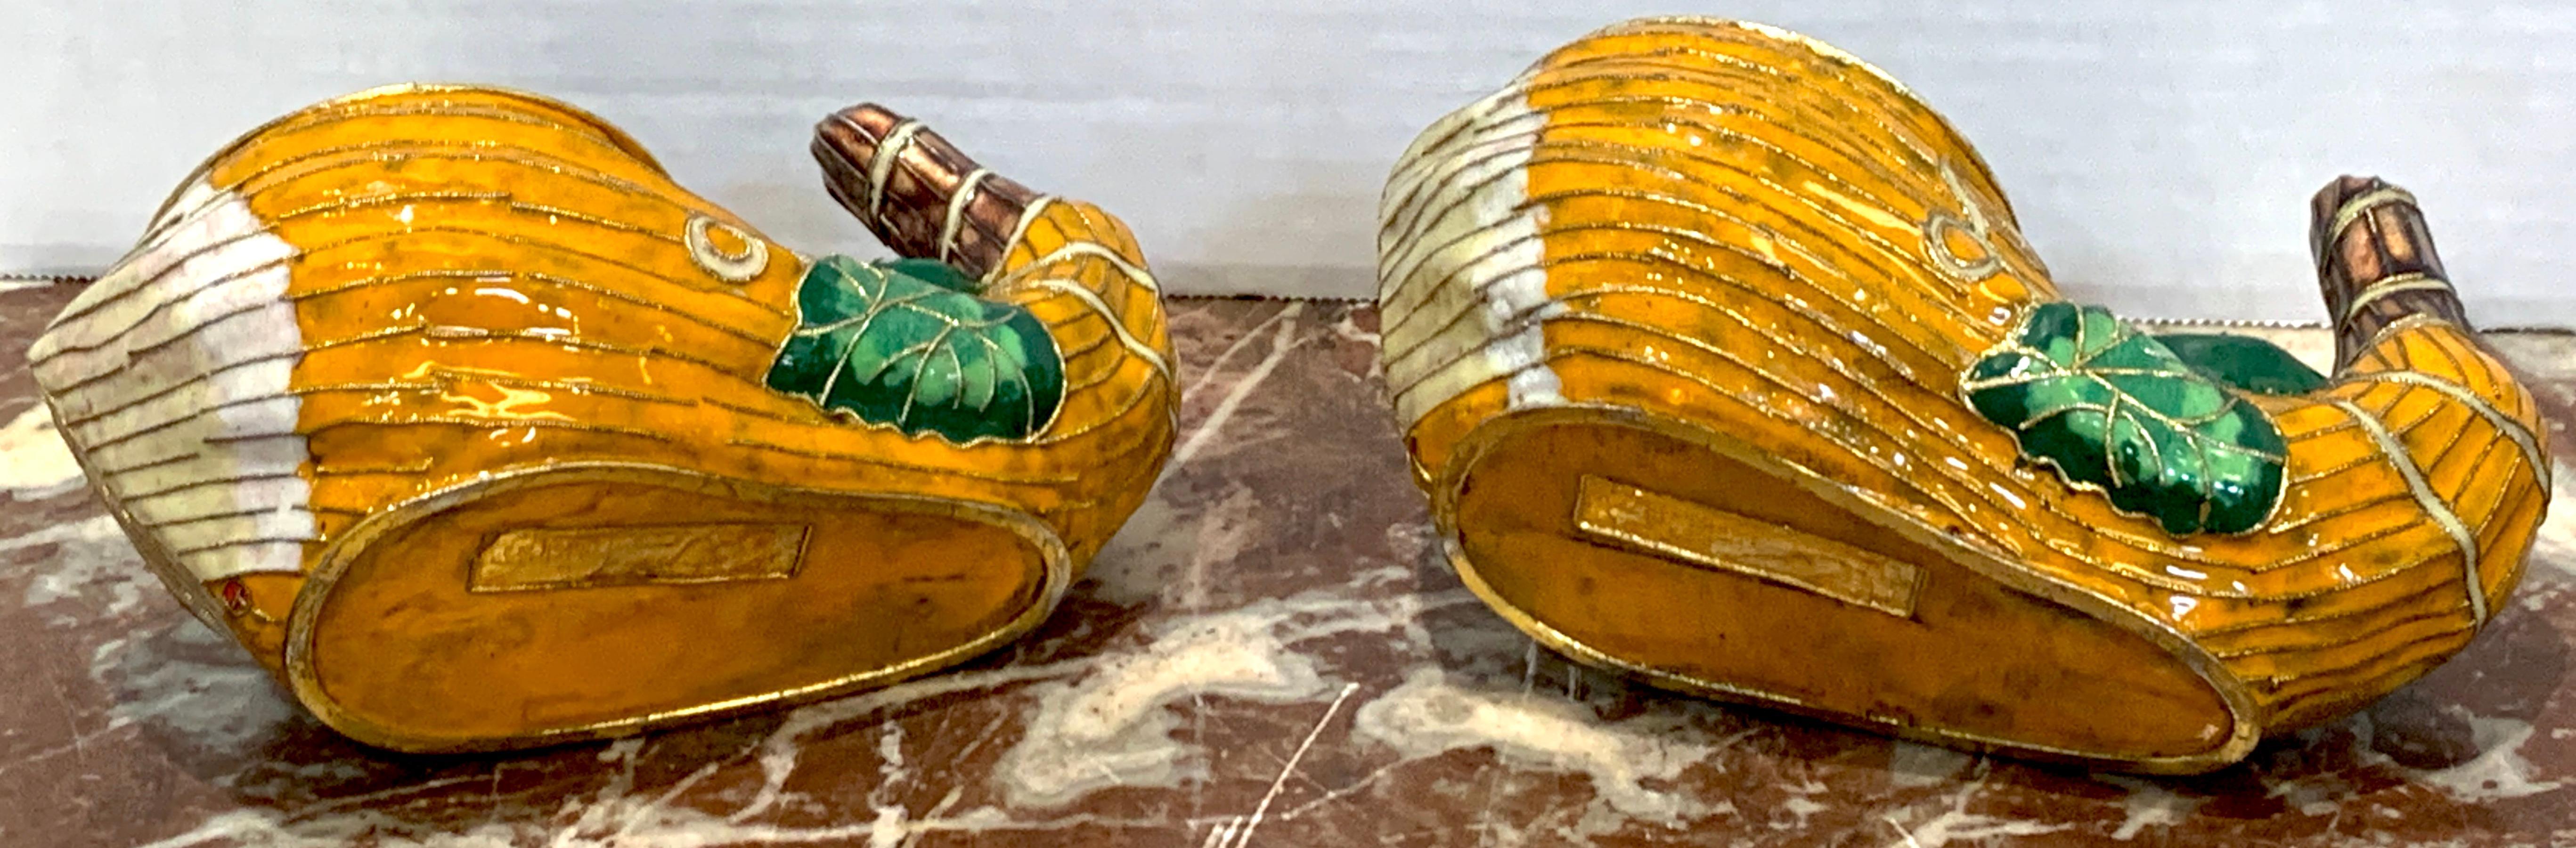 Pair of Chinese Export Enamel Gourd Cachepots For Sale 2